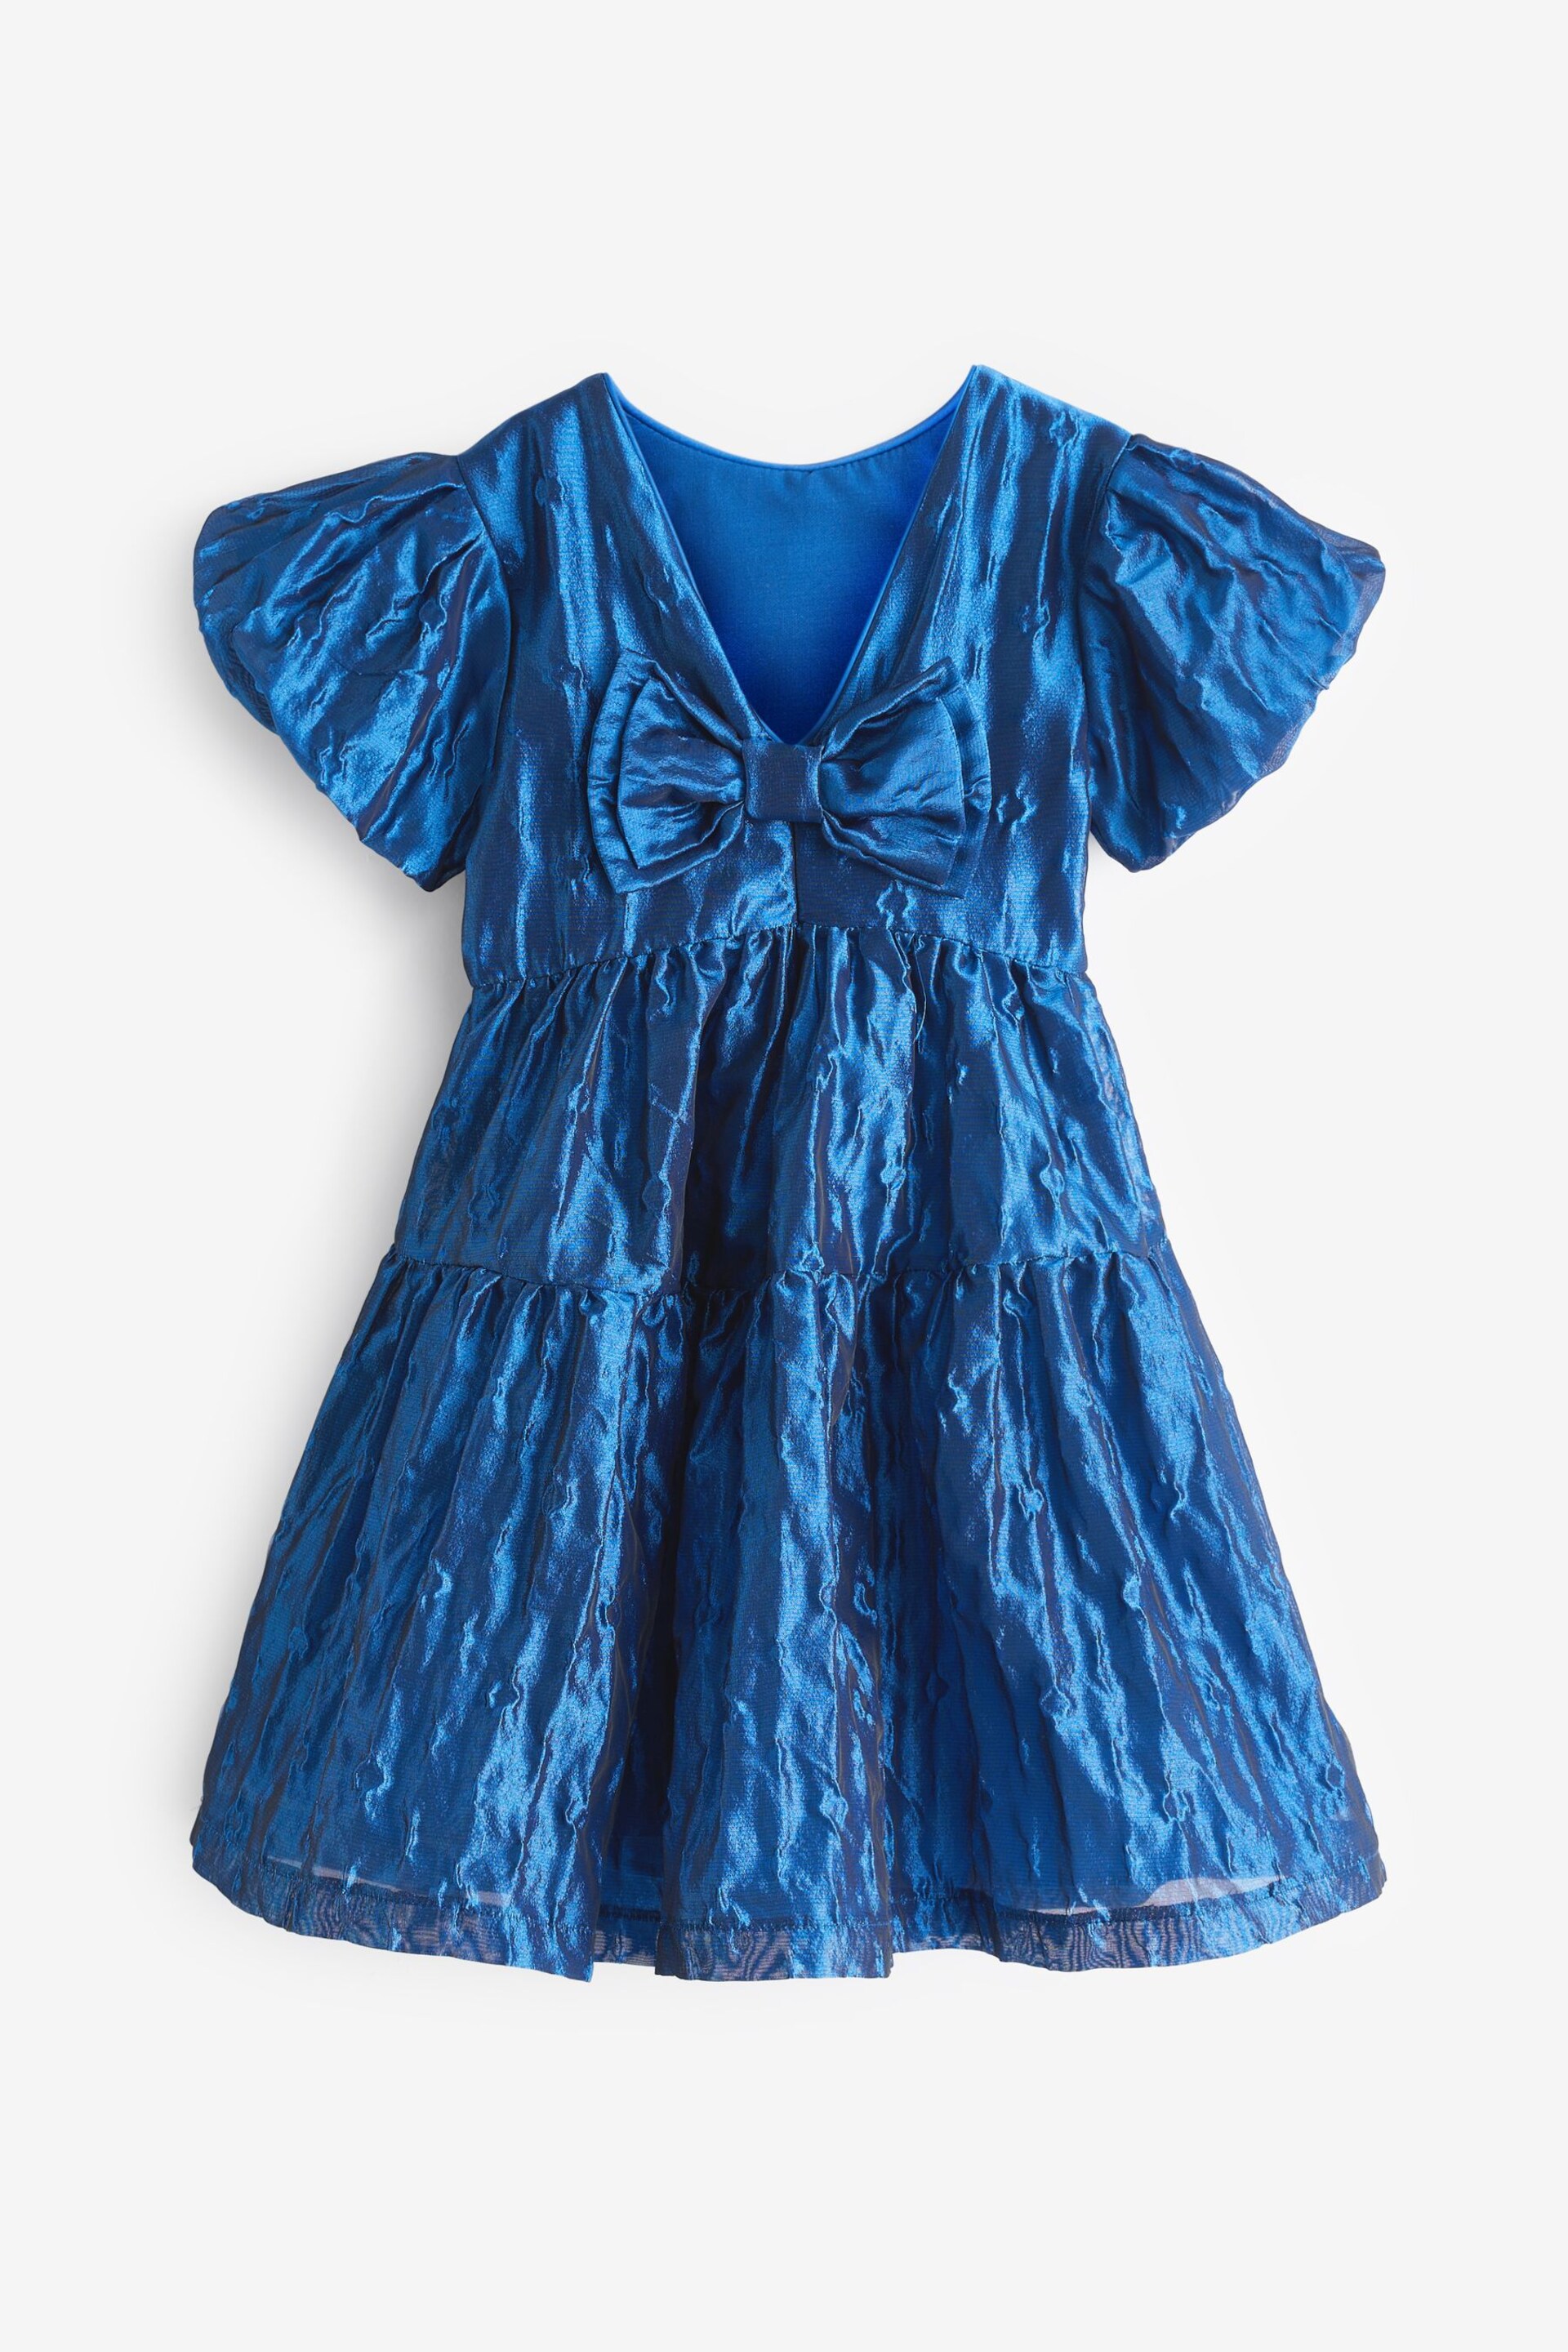 Baker by Ted Baker Blue Cloque Dress - Image 7 of 10